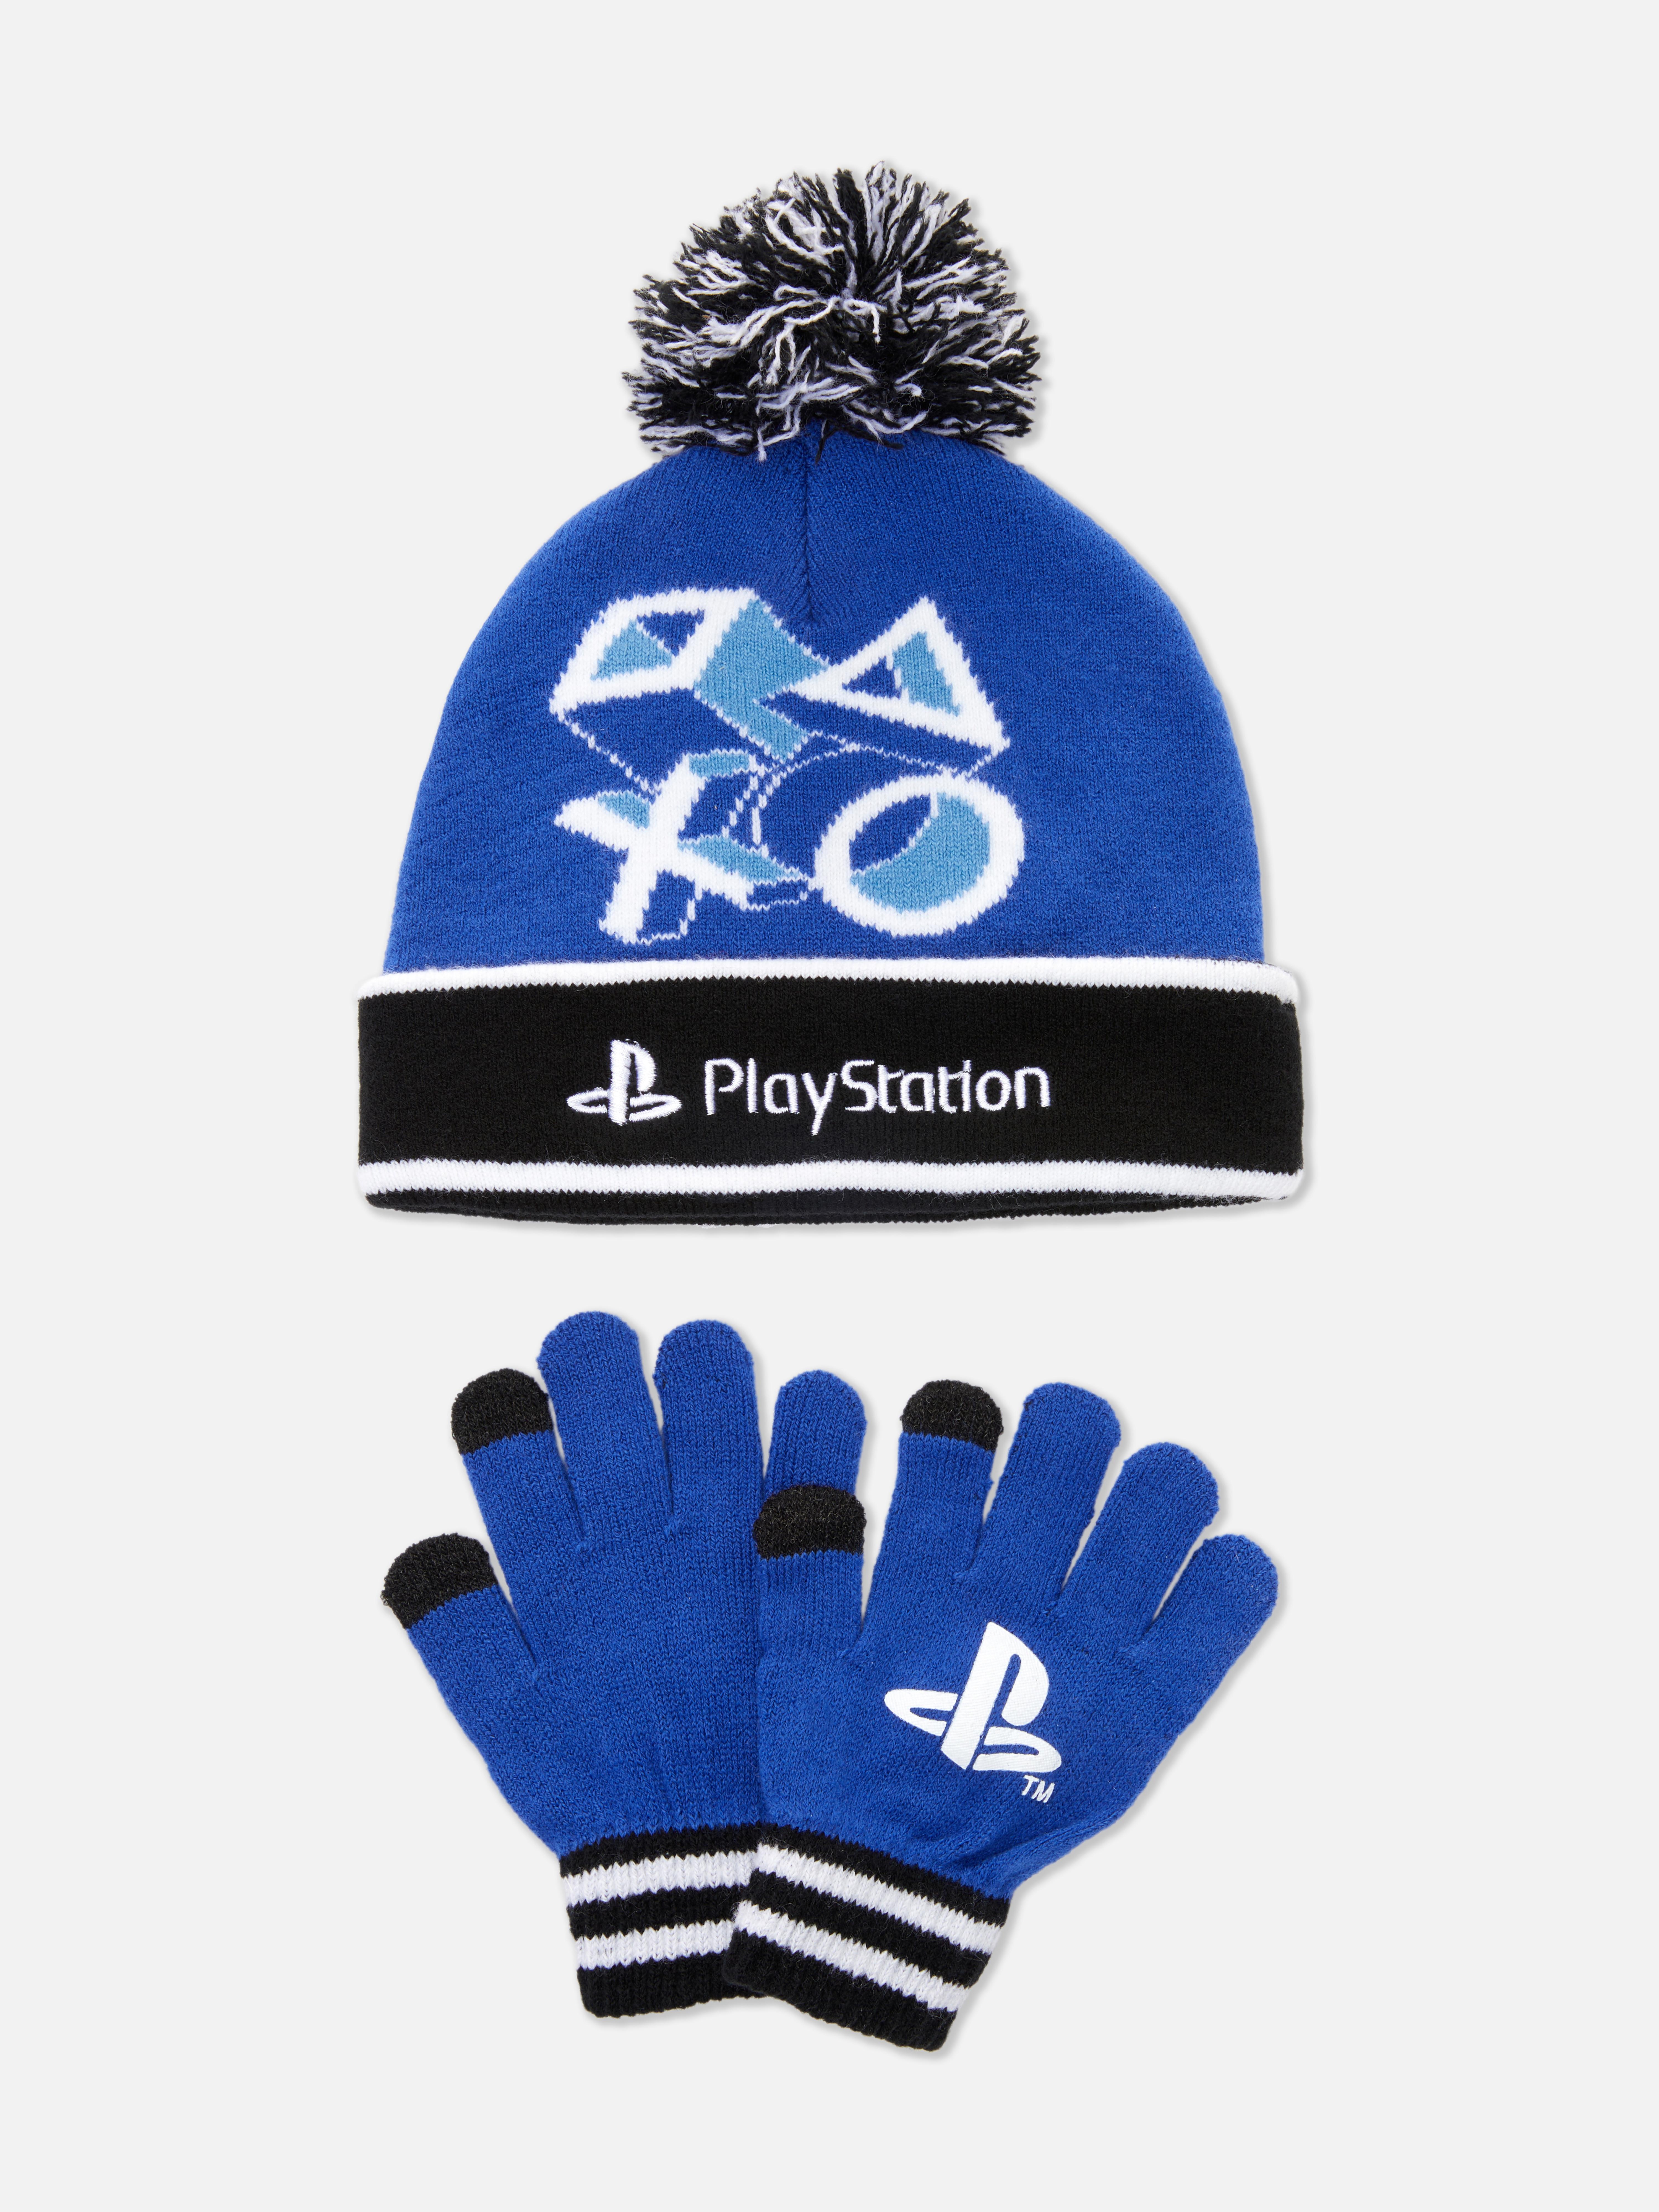 PlayStation Beanie and Gloves Set